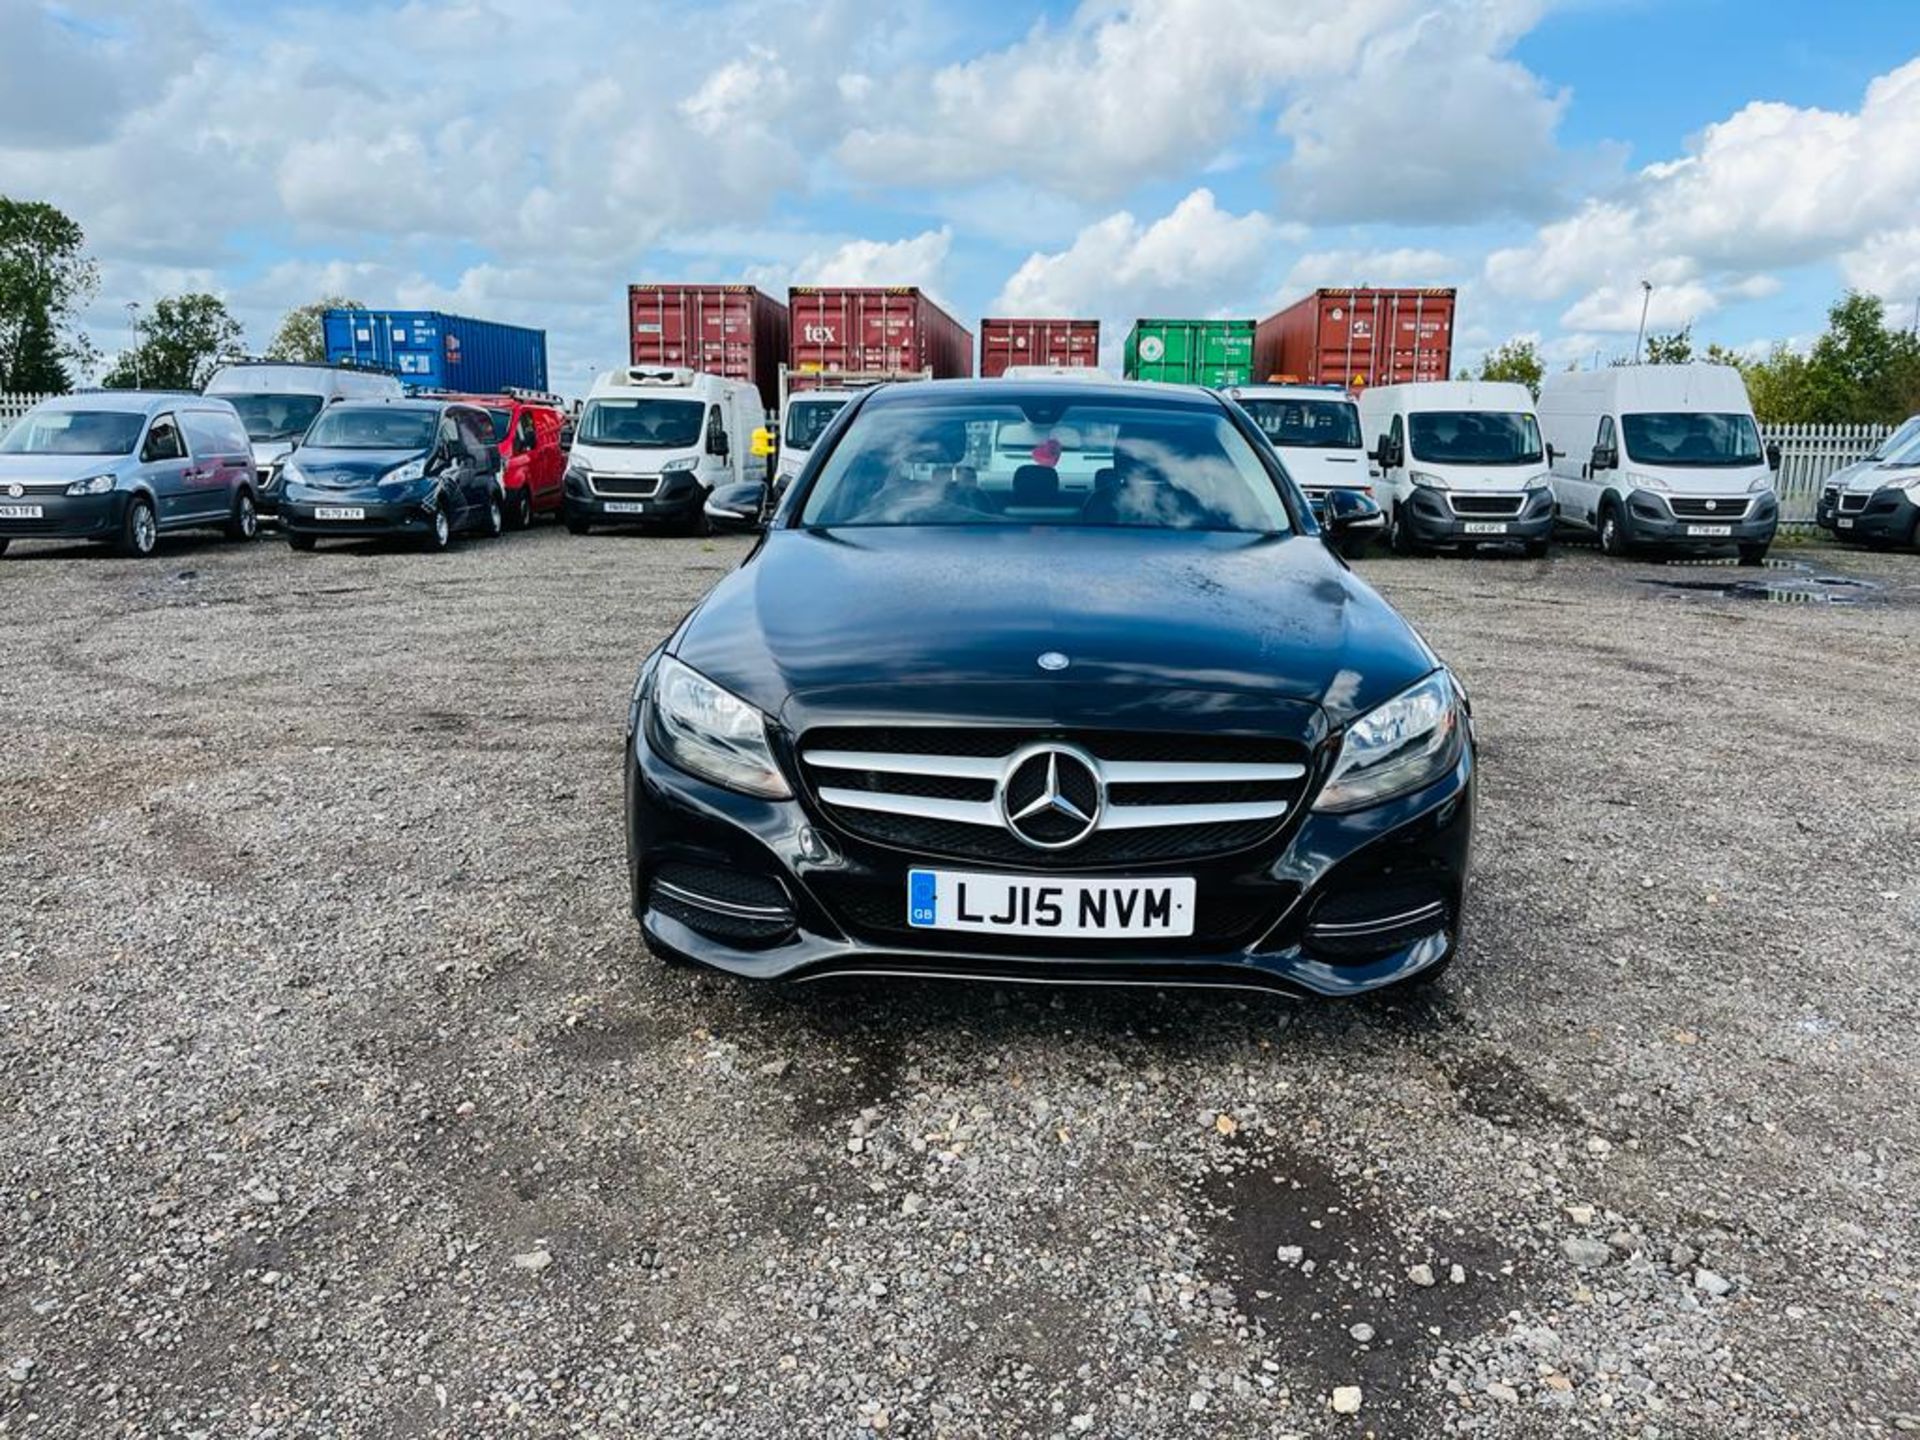 ** ON SALE ** Mercedes - Benz C220 SE Saloon 2.1 2015 "15 Reg" - Automatic - A/C - Only 72548 Miles - Image 2 of 29